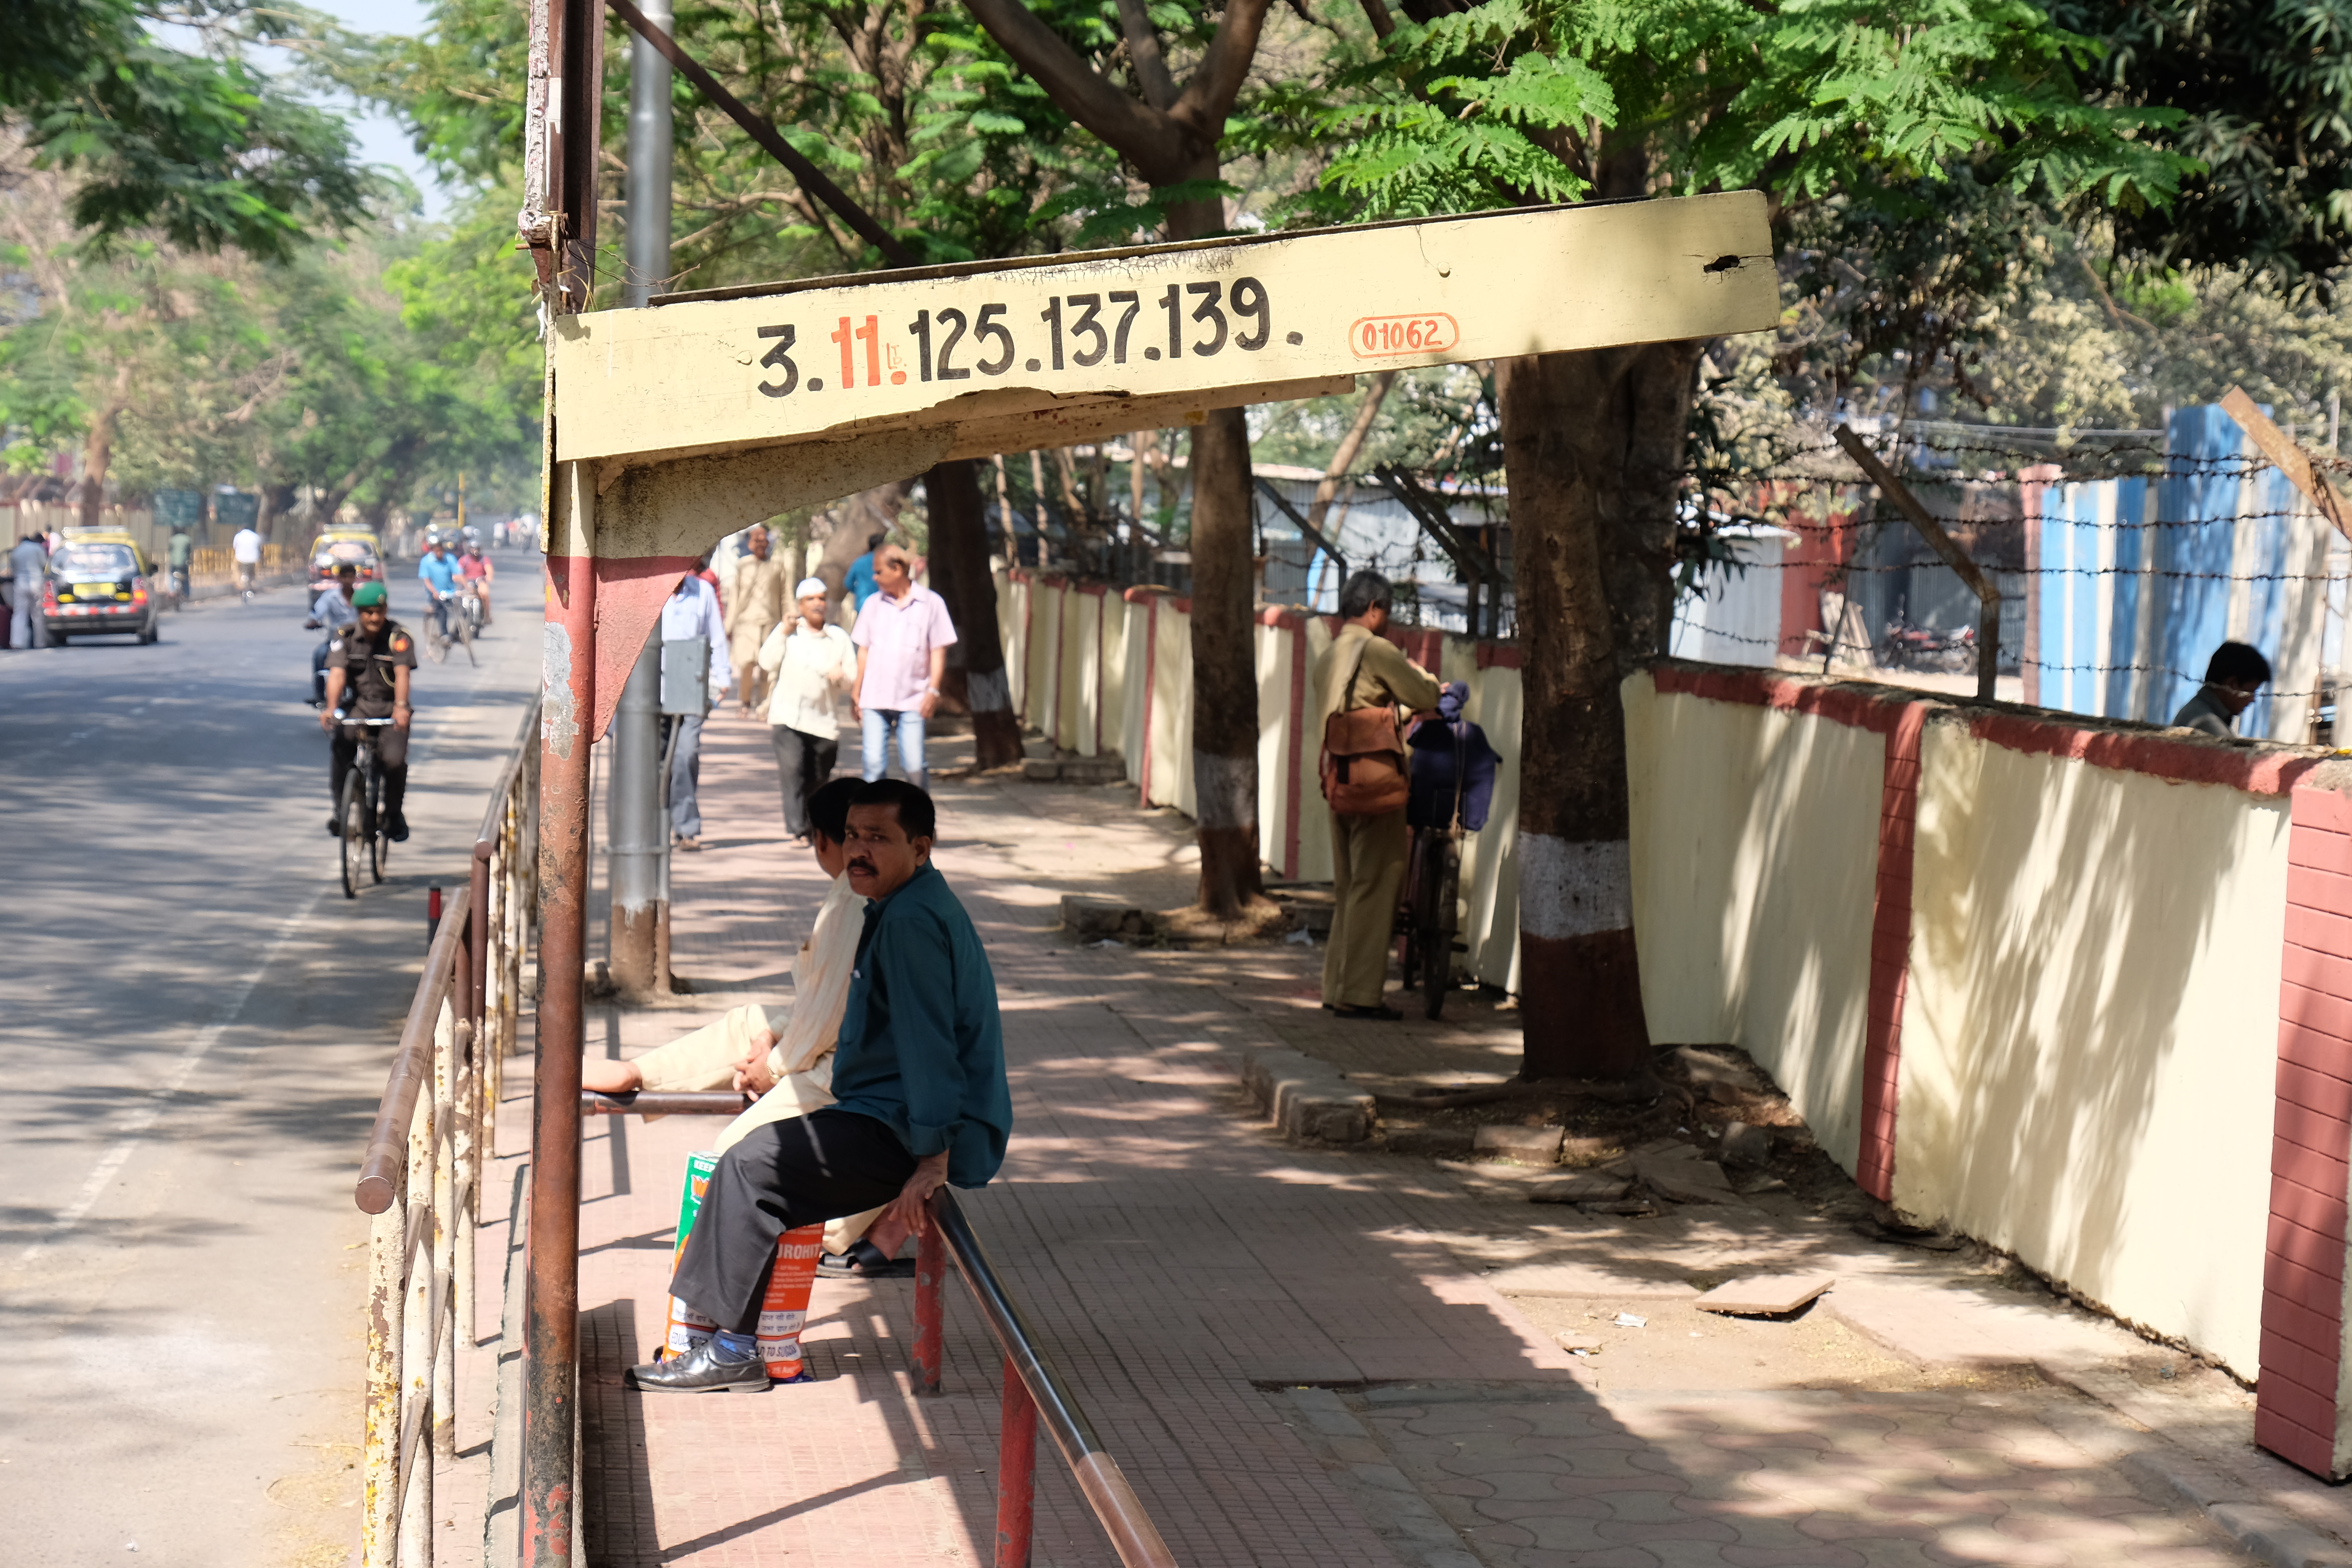 Waiting for the bus in Colaba, Mumbai